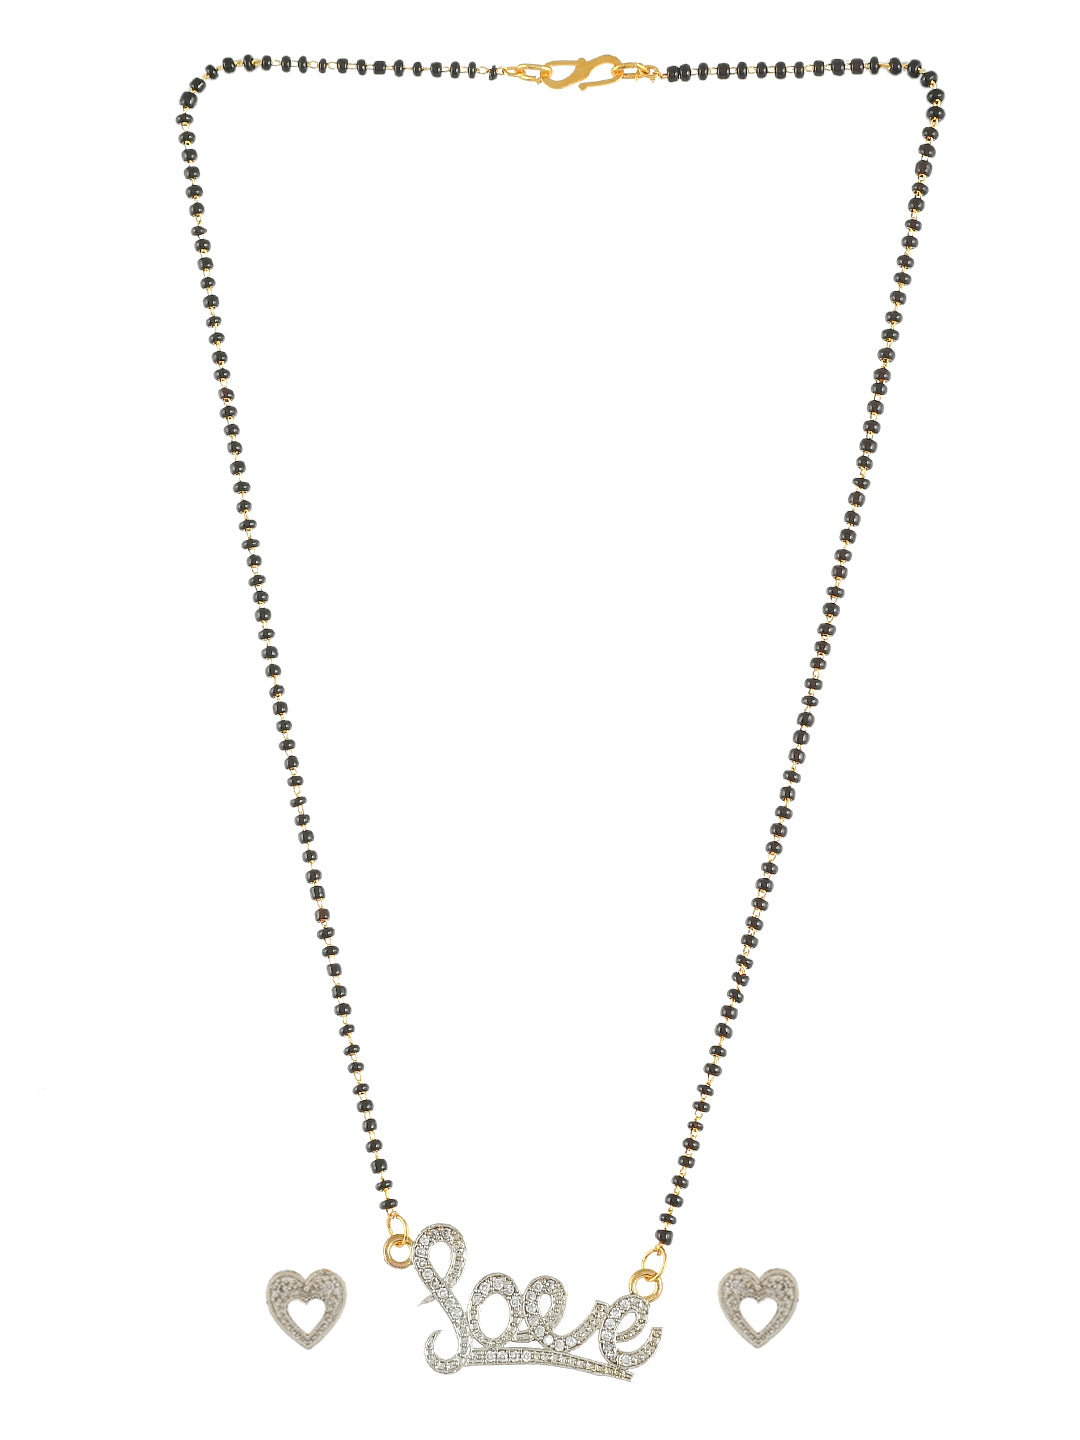 American Diamond Love Mangalsutra Necklace With Heart Stud Earrings